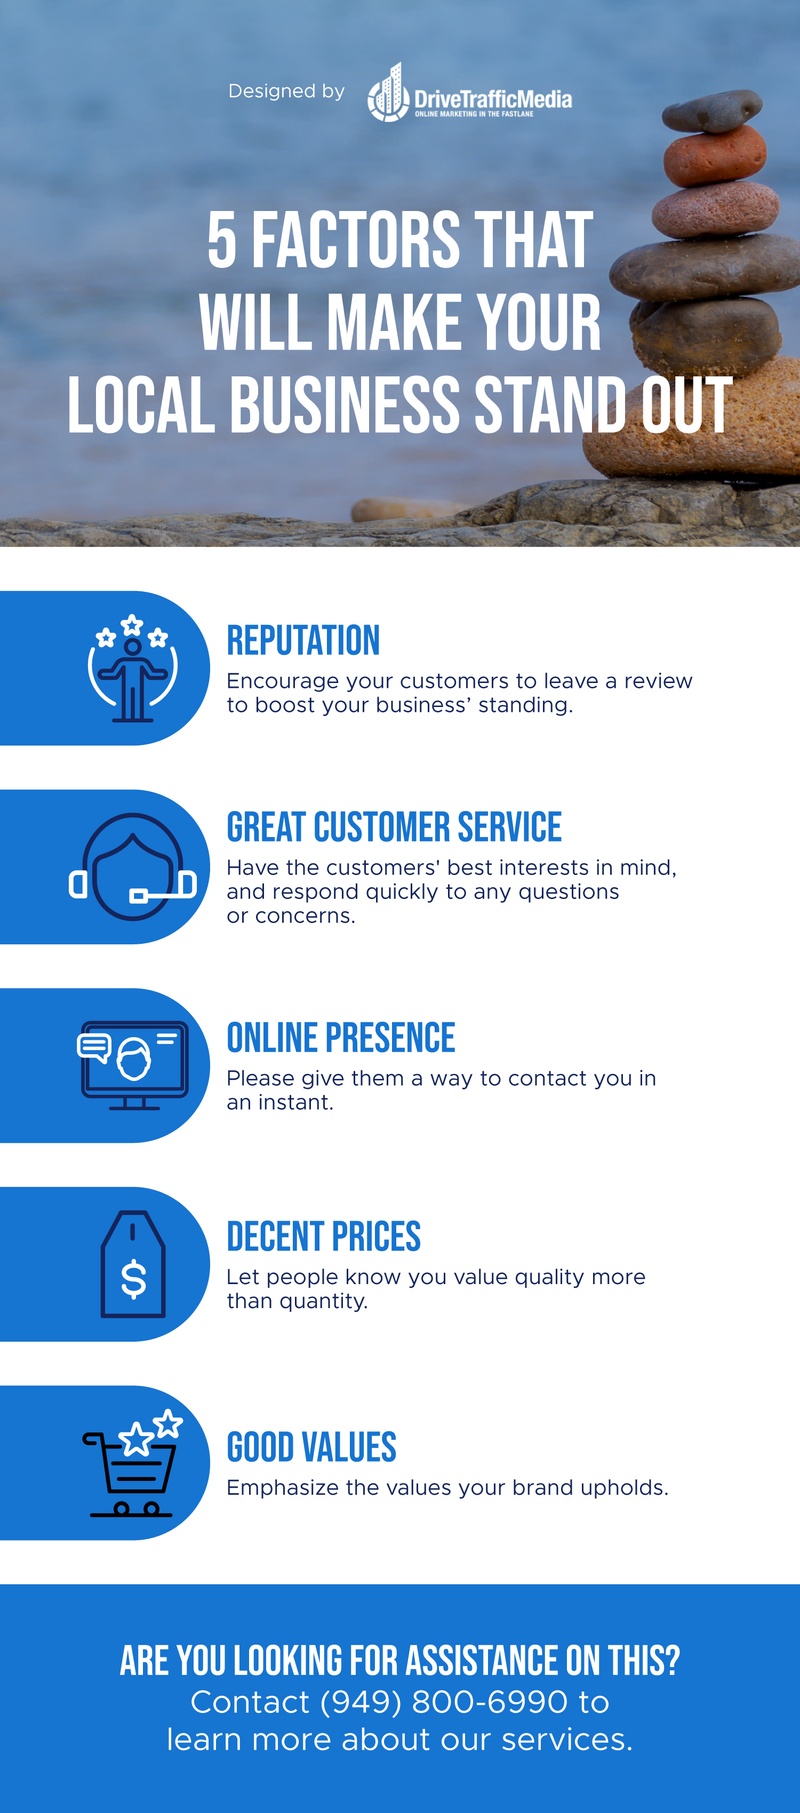 5-Factors-That-Will-Make-Your-Local-Business-Stand-Out-infographic